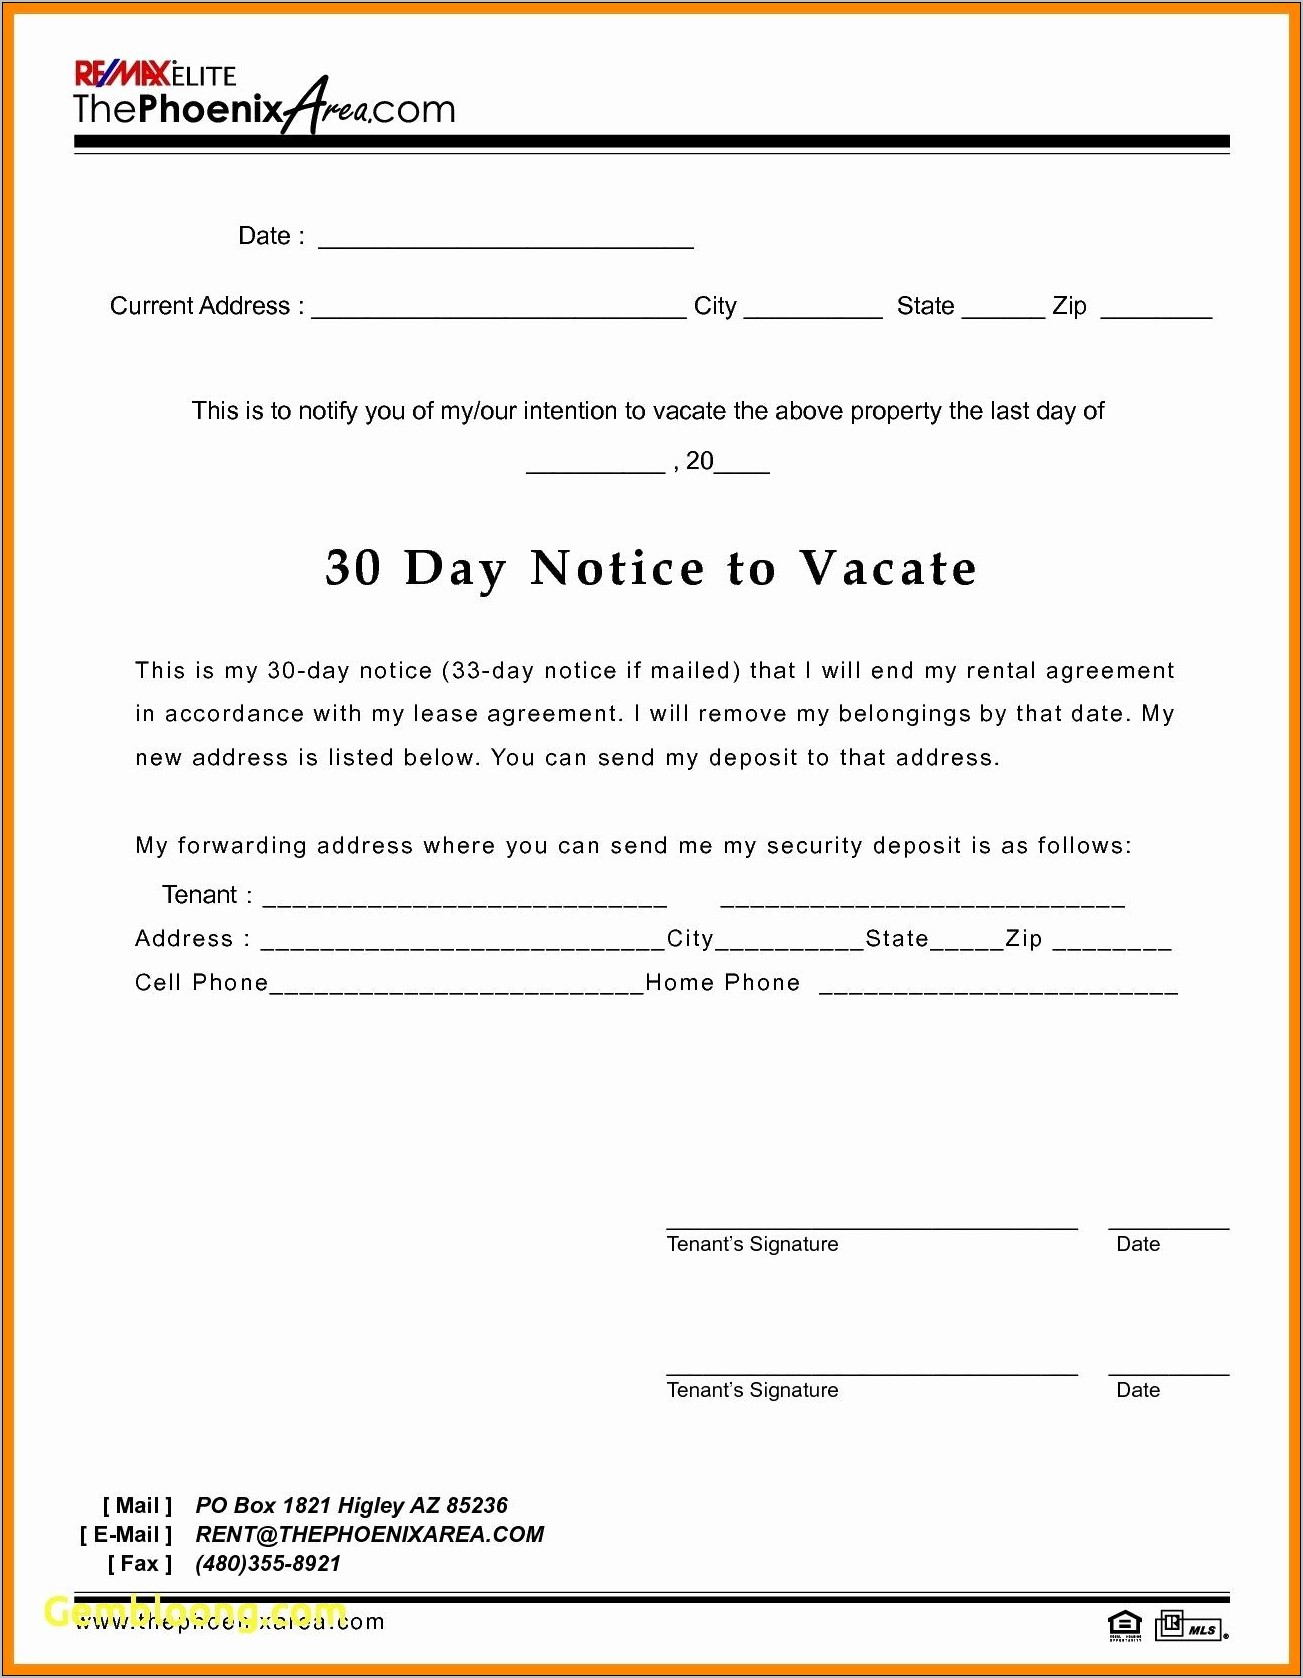 Template For 30 Day Eviction Notice